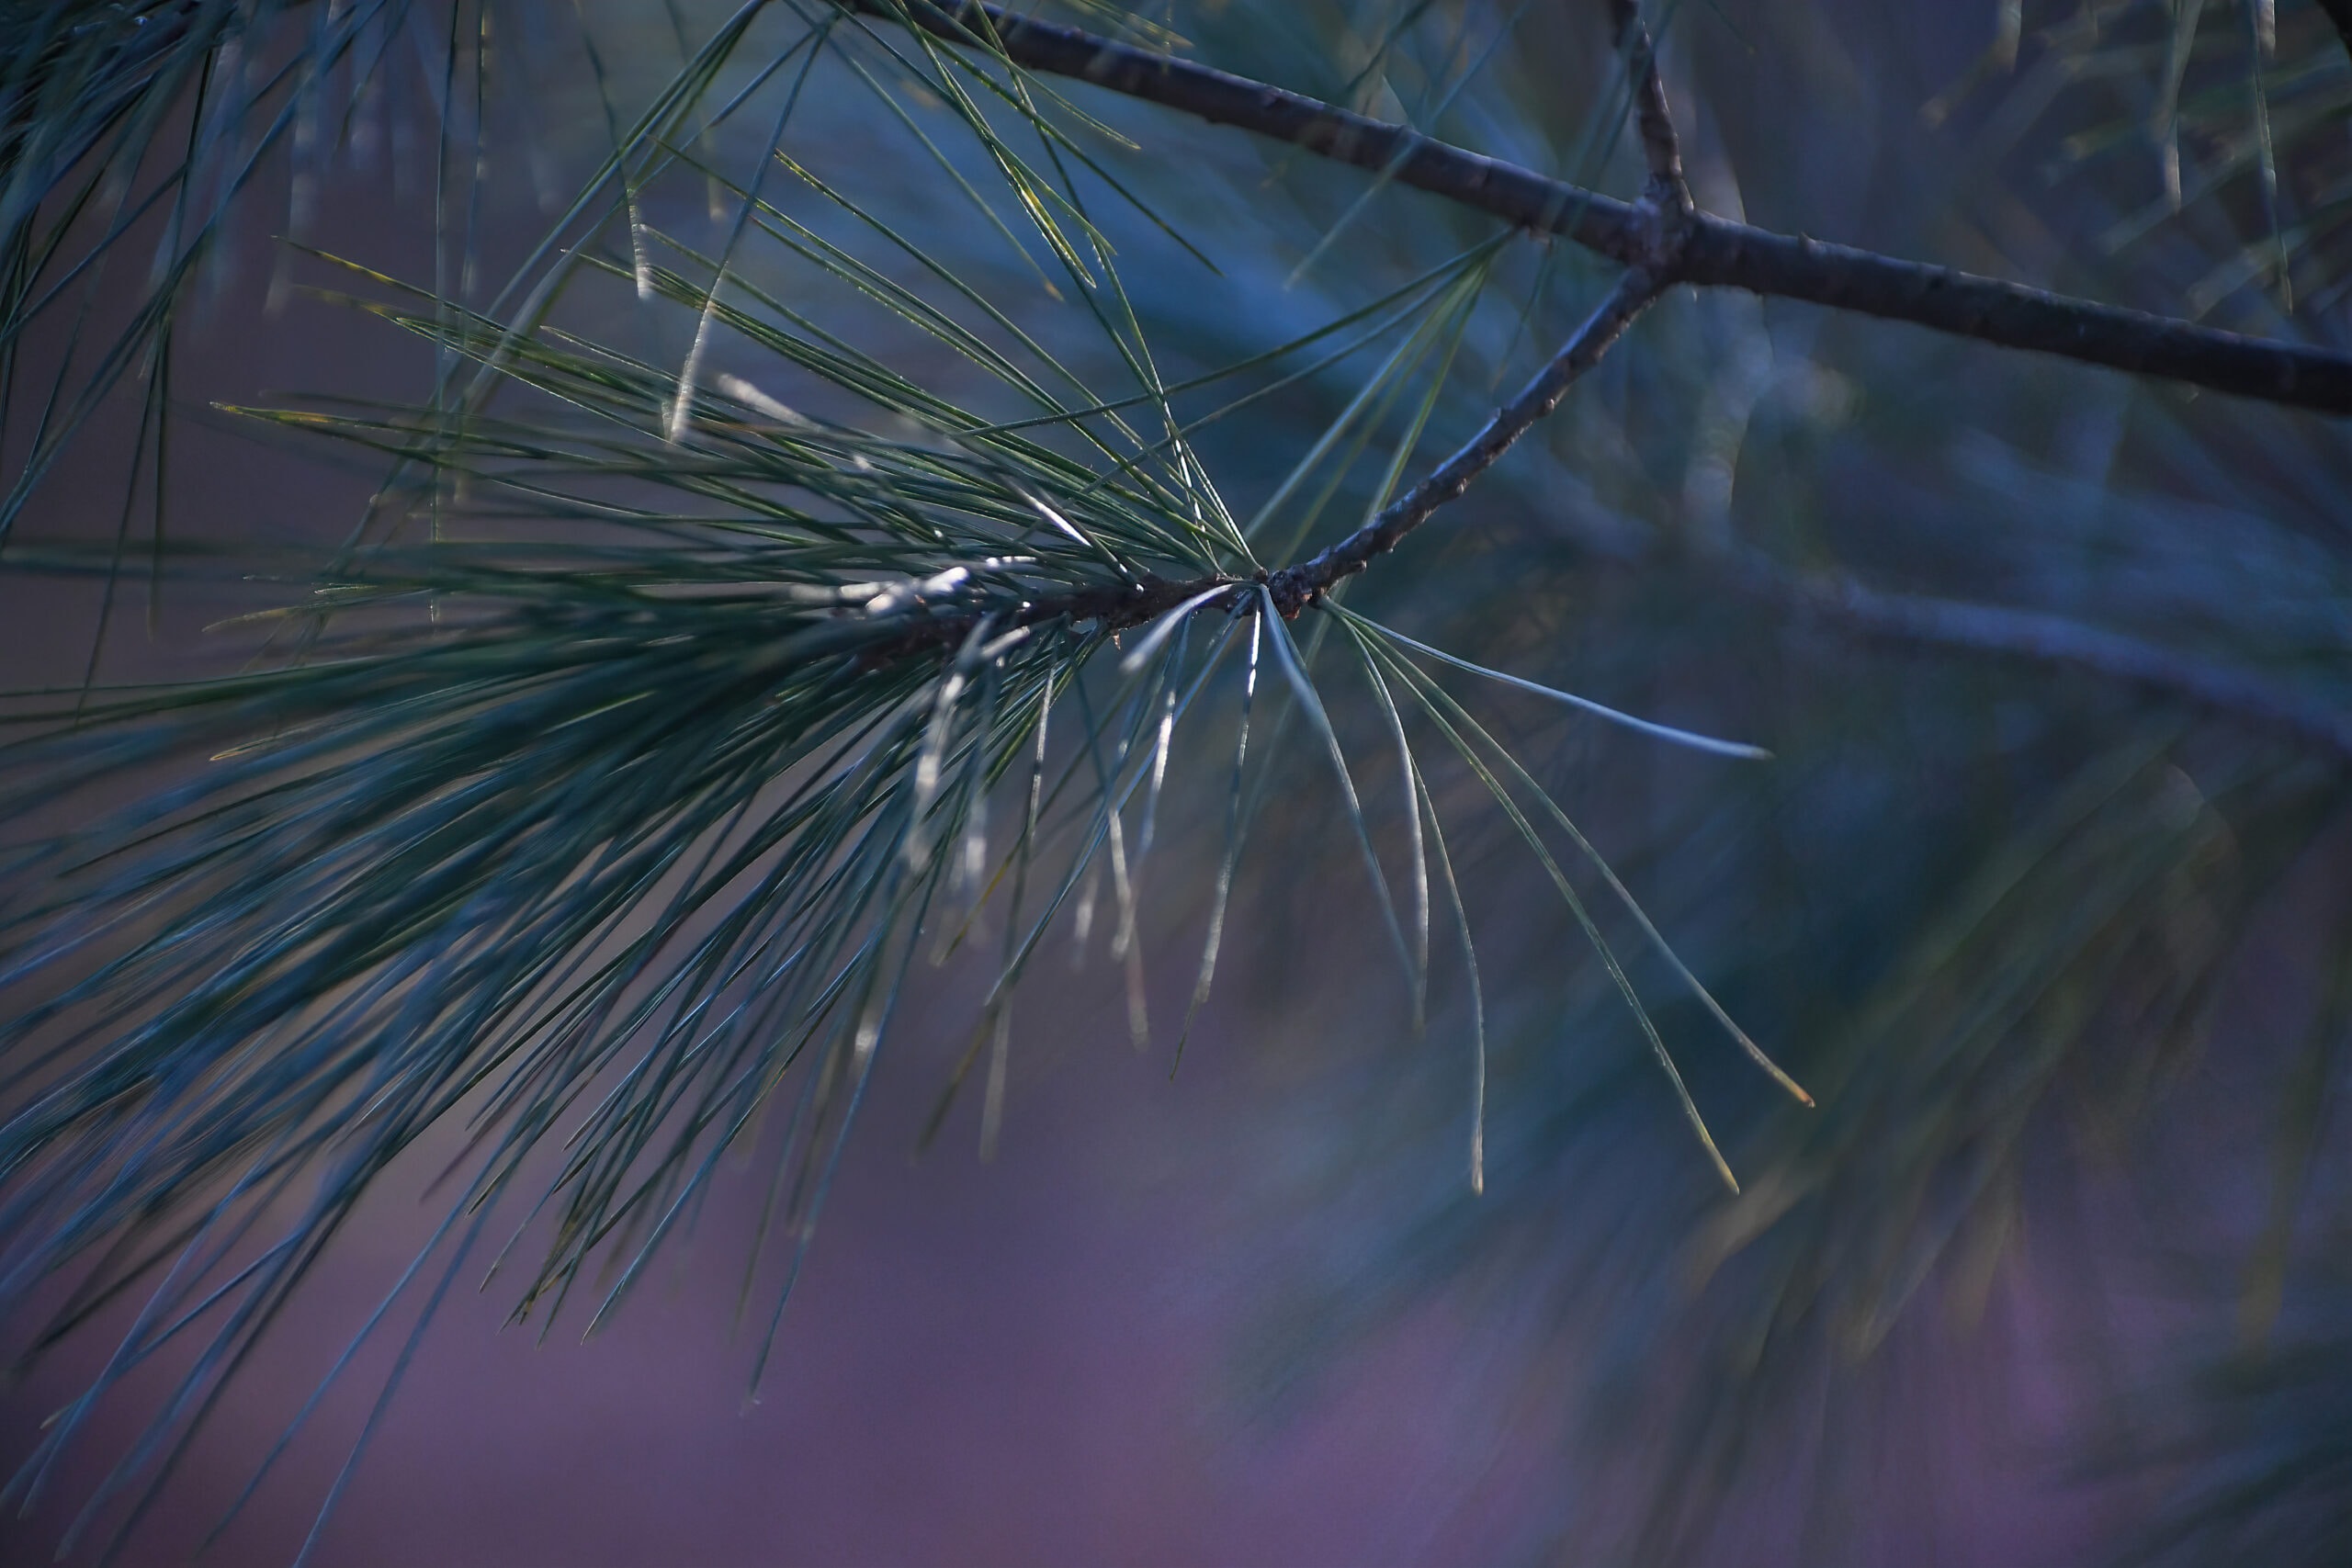 Close-up of a bundle of pine needles. The background glows a wintery purple